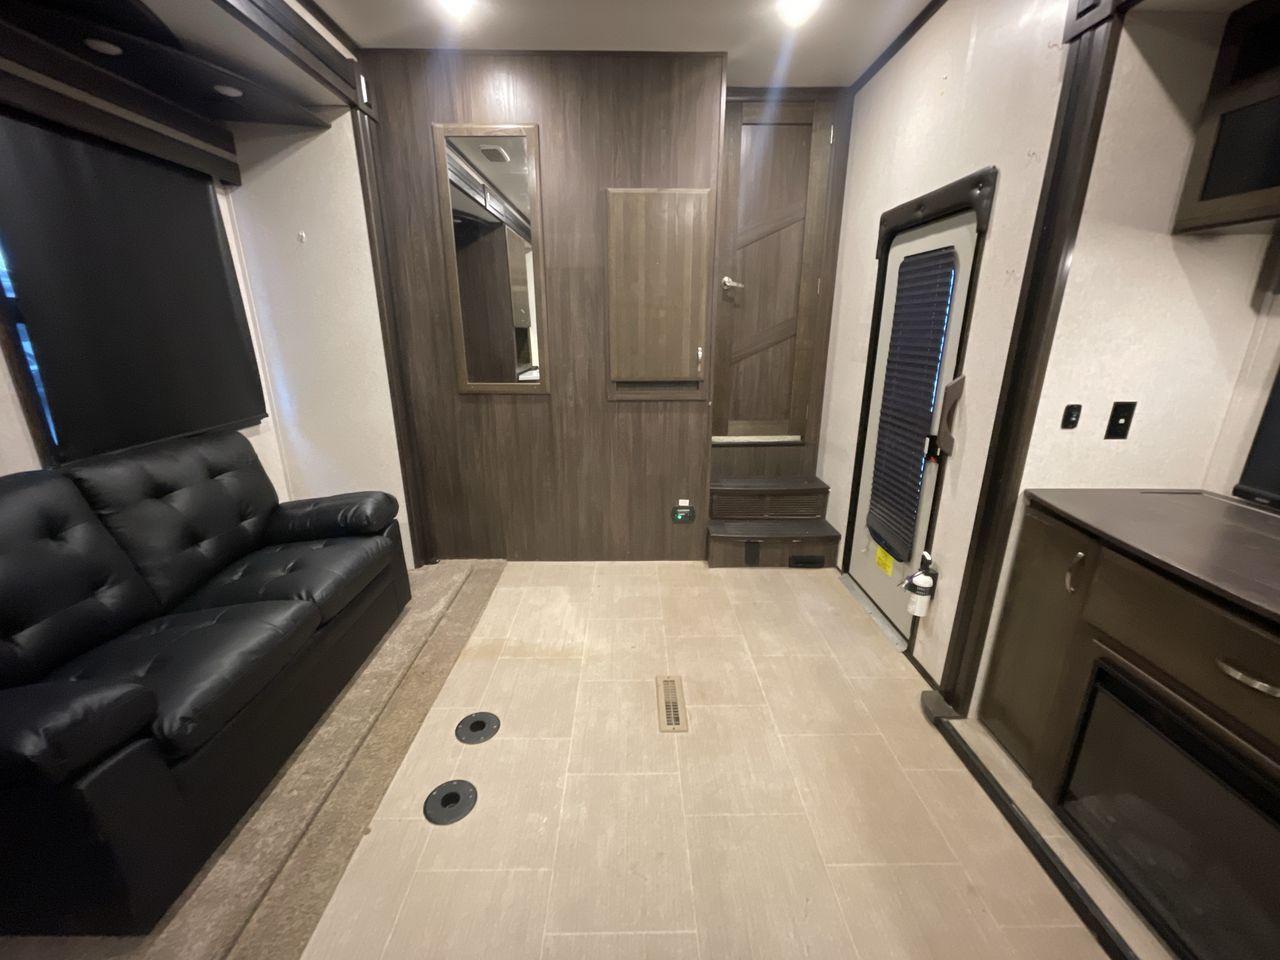 2018 GRAY JAYCO SEISMIC 4250 - (1UJCJSCV5J1) , Length: 44.92 ft. | Dry Weight: 15,570 lbs. | Gross Weight: 20,000 lbs. | Slides: 3 transmission, located at 4319 N Main St, Cleburne, TX, 76033, (817) 678-5133, 32.385960, -97.391212 - Set out to the great outdoors in this 2018 Jayco Seismic 4250 and enjoy all its amenities! This toy hauler measures just a bit under 45 ft. in length and 13.32 ft. in height, providing great space and comfort. It has a dry weight of 15,570 lbs. and a GVWR of 20,000 lbs. It also comes with automatic - Photo #15